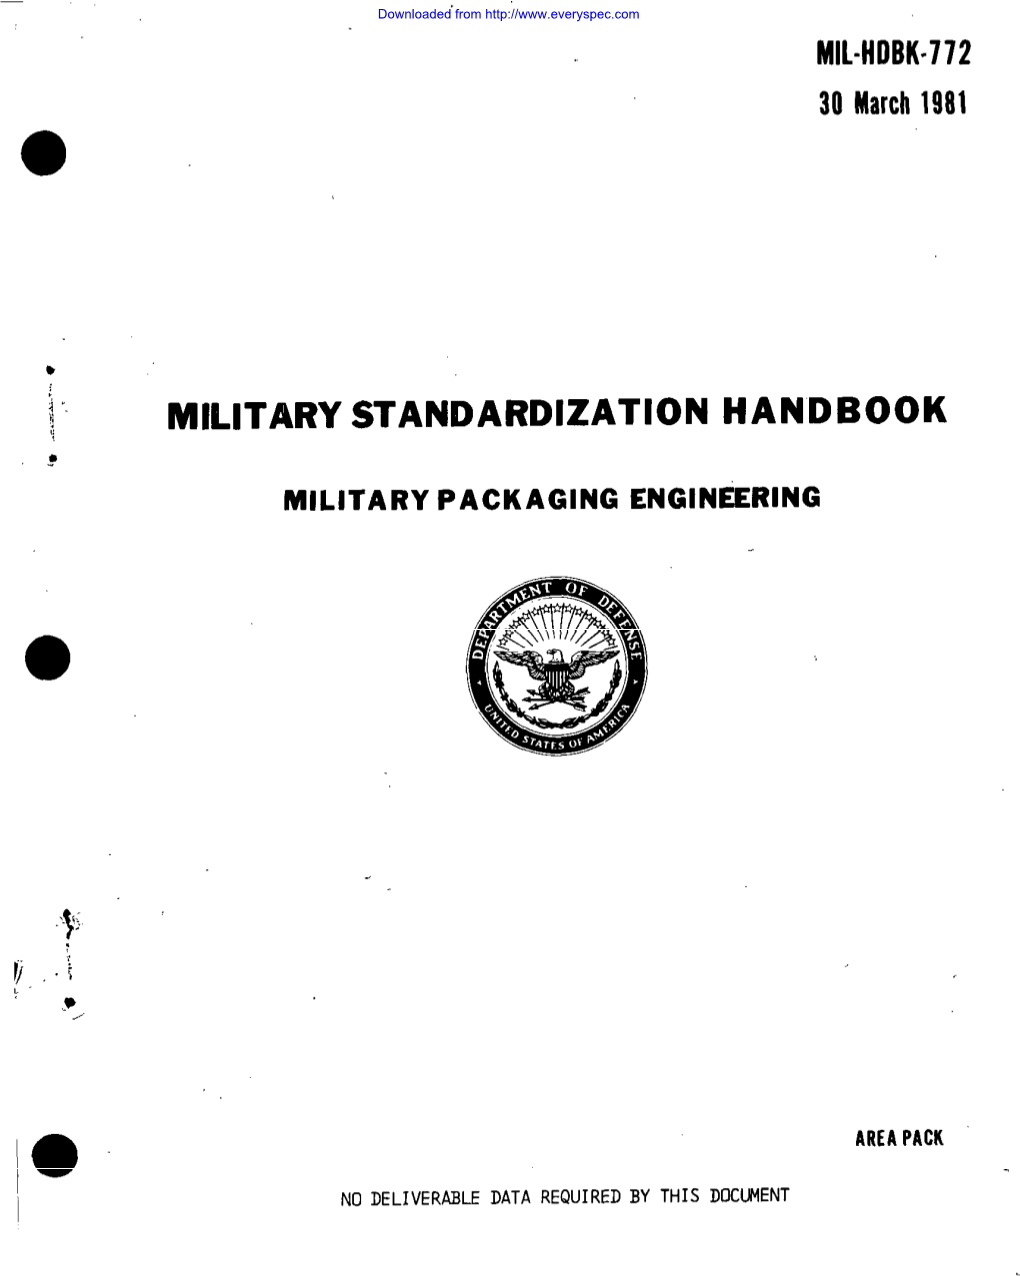 MIL-HDBK-772 Military Packaging Engineering 30 March 1981